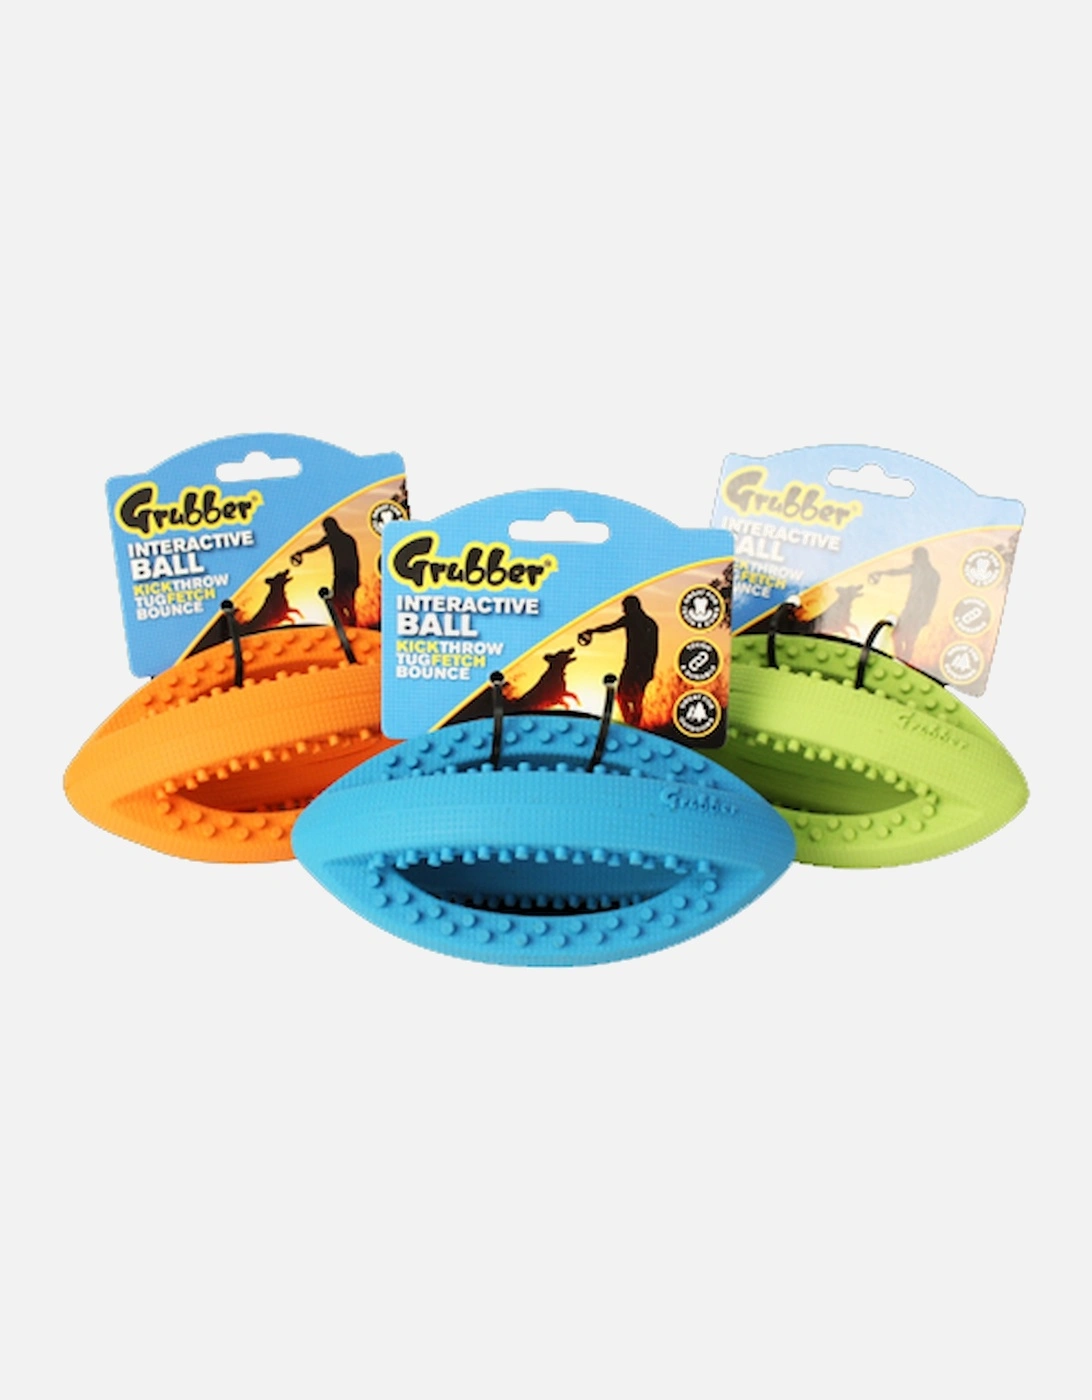 Grubber Interactive Rugby Ball Mini, 2 of 1